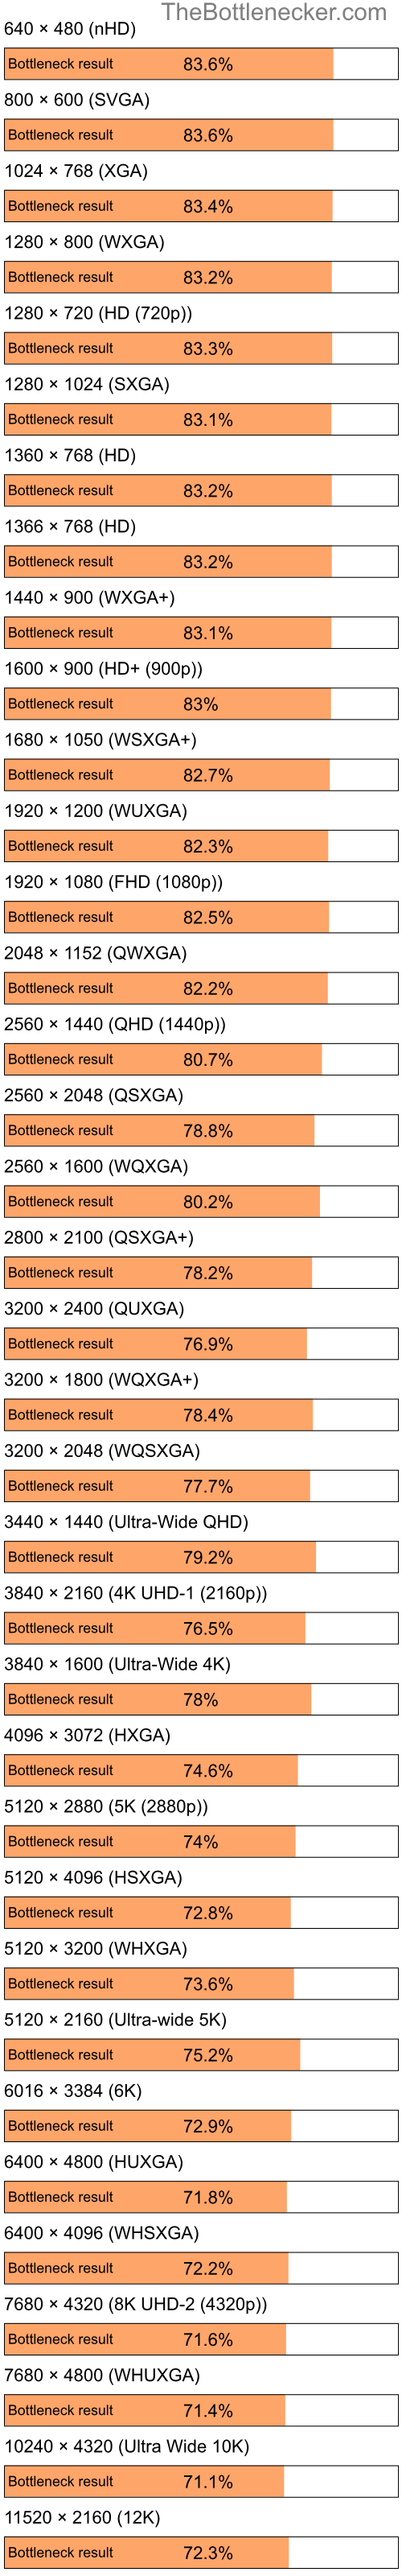 Bottleneck results by resolution for Intel Pentium 4 and NVIDIA GeForce RTX 3060 Ti in Graphic Card Intense Tasks